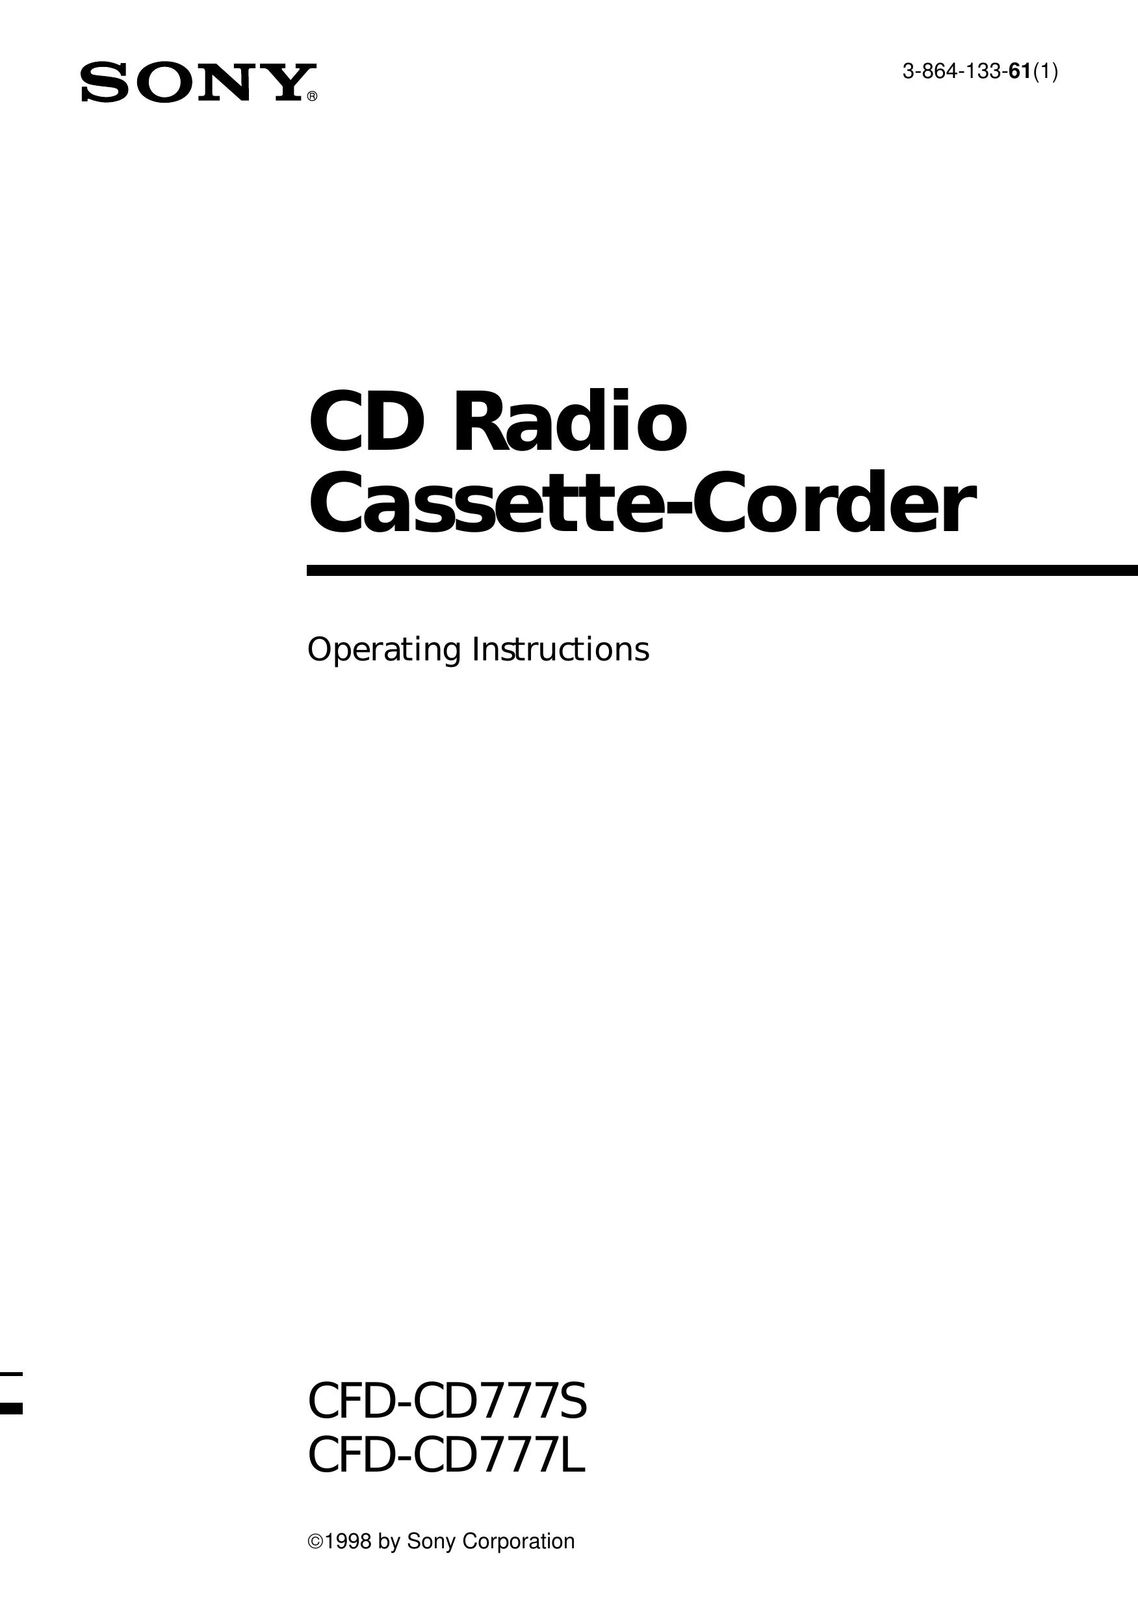 Sony CFD-CD777S Cassette Player User Manual